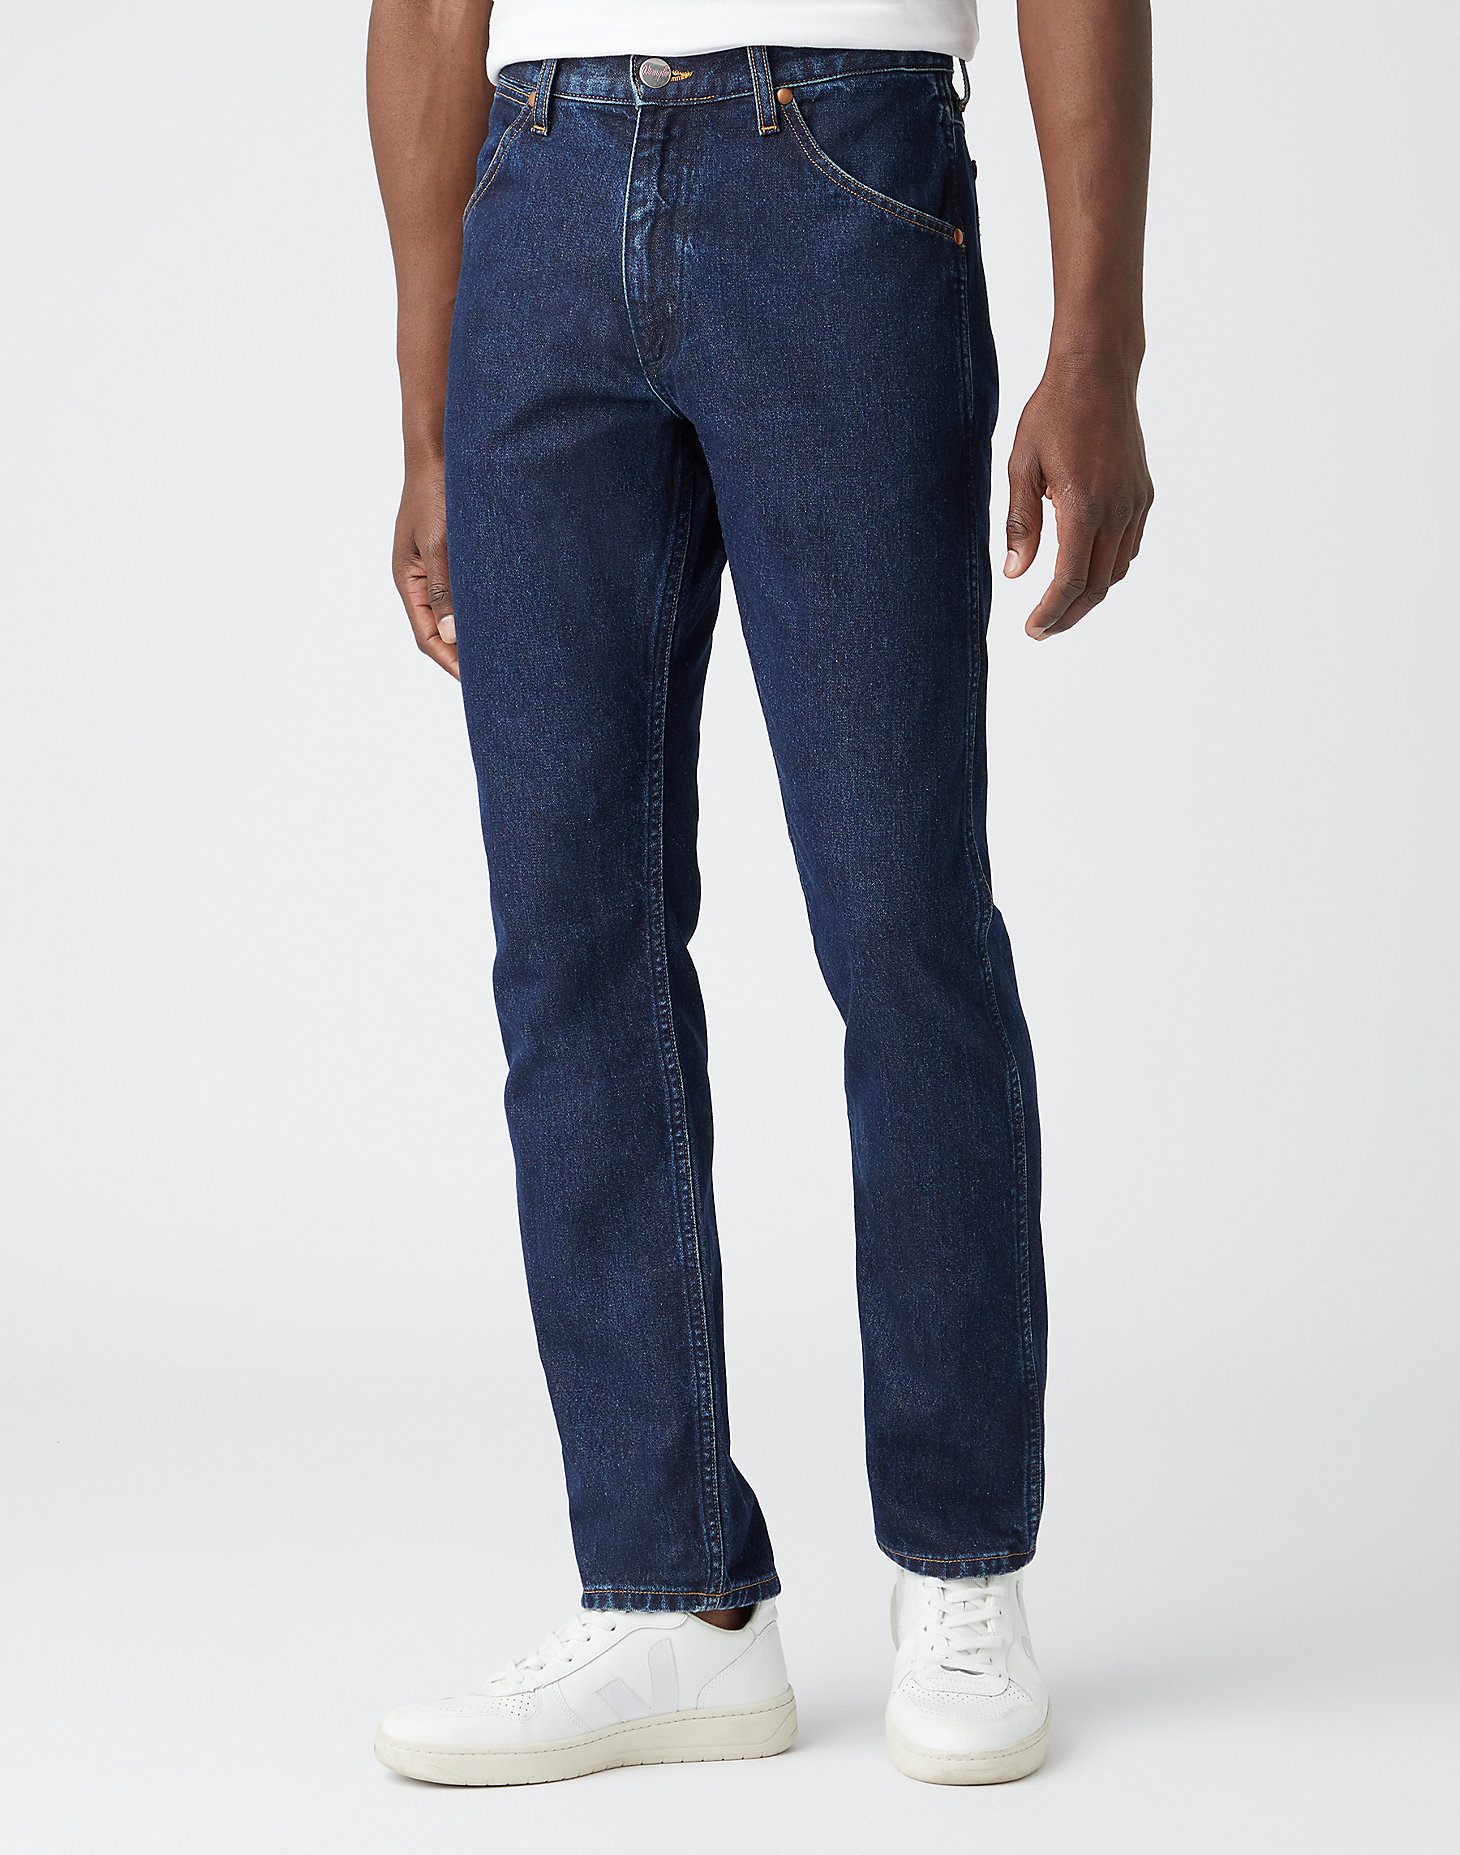 Indigood Icons 11MWZ Western Slim Jeans in Infinited Blue main view